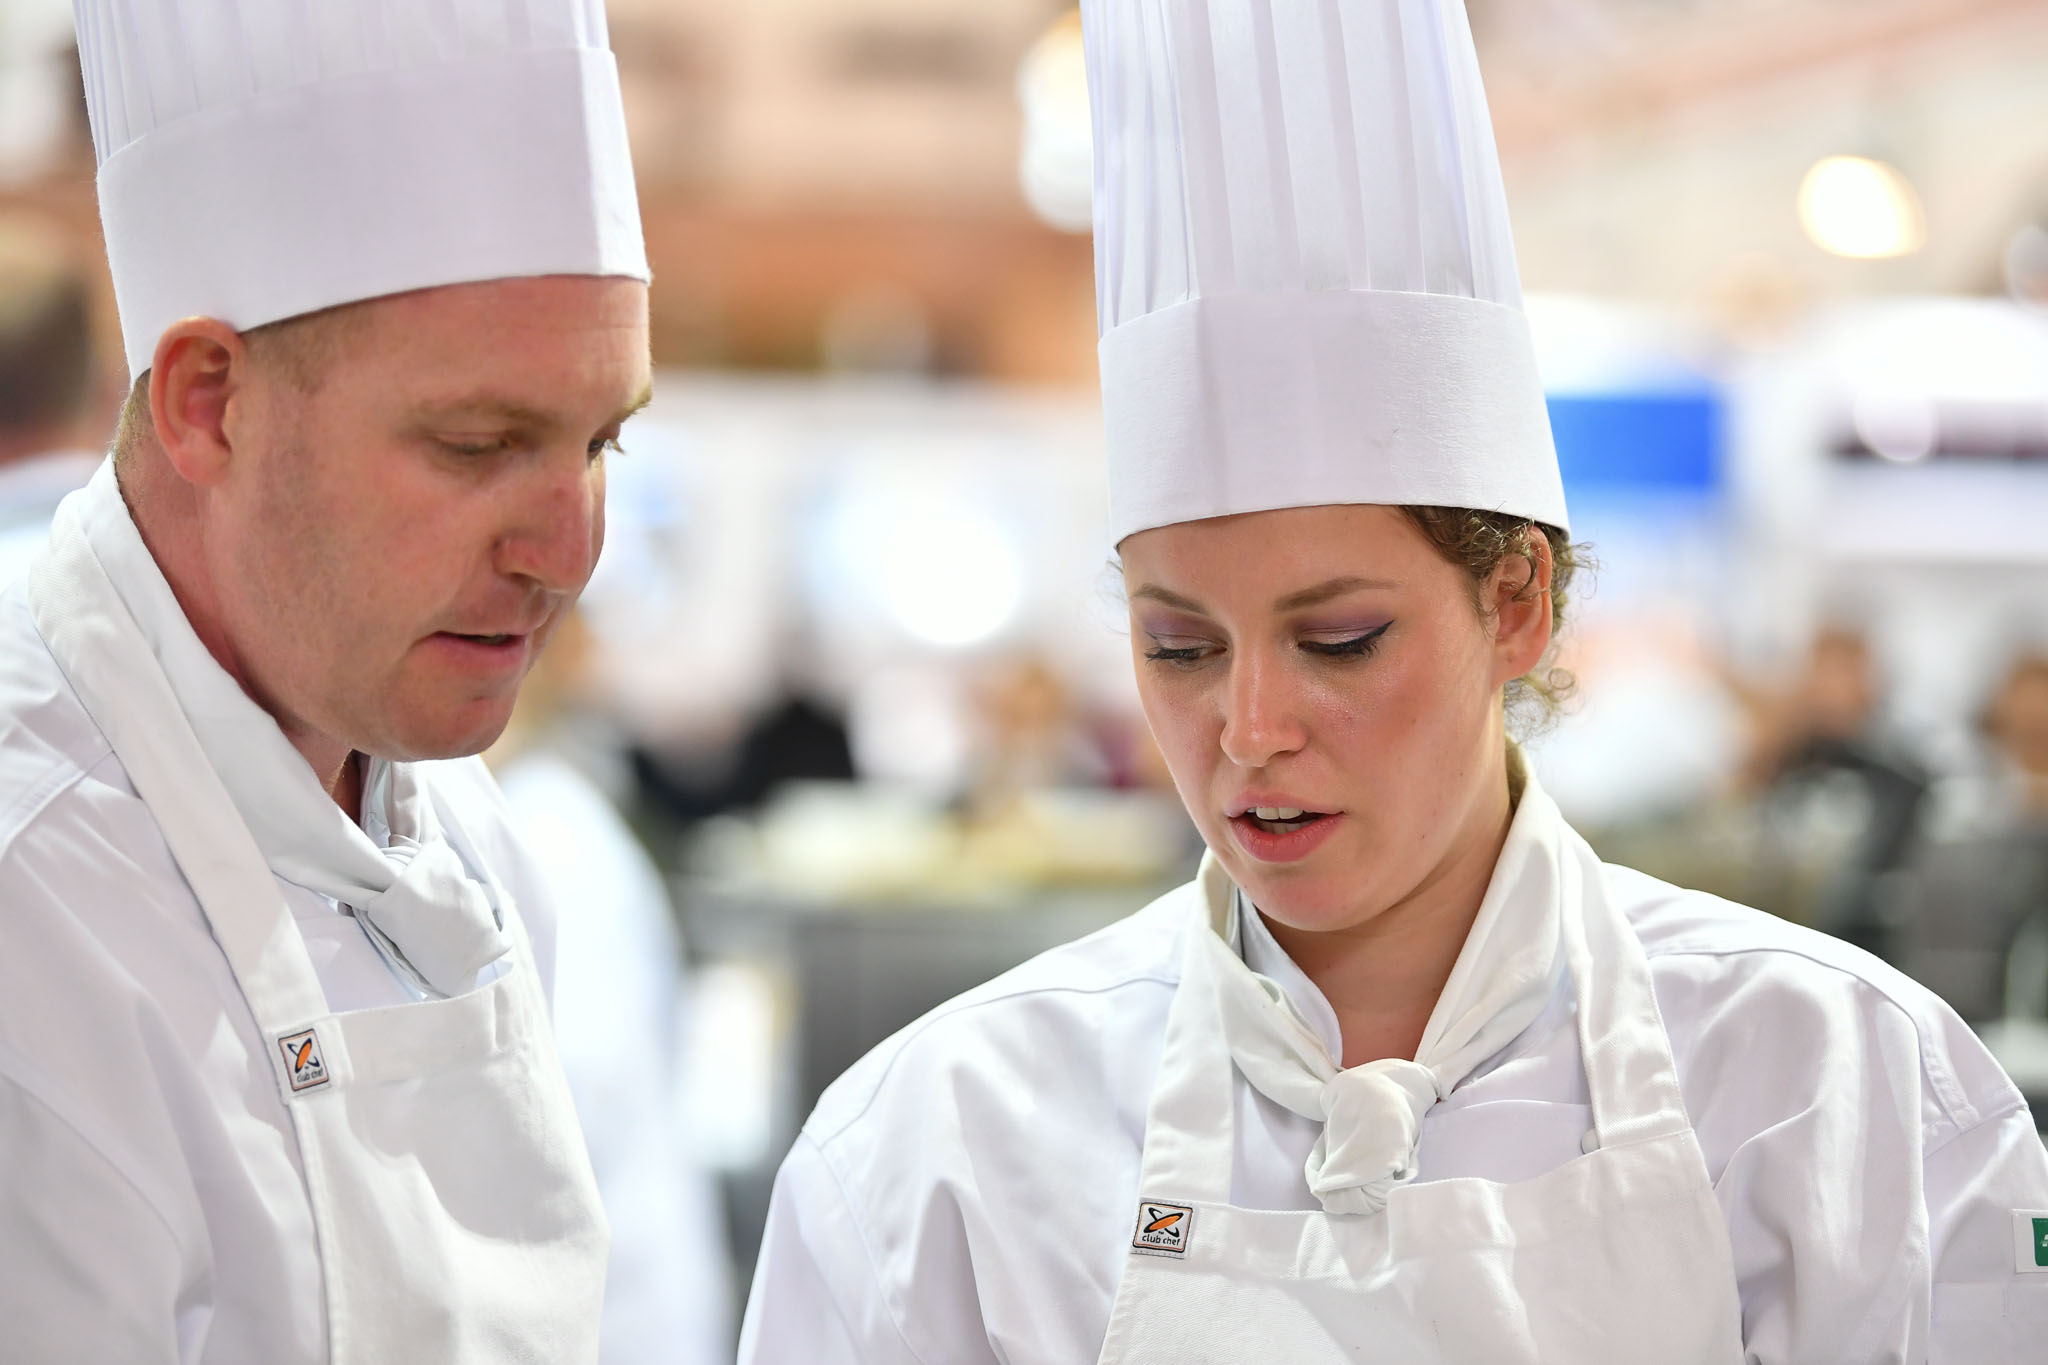 Melbourne, 30 May 2017 - Michael Cole and commis chef Laura Skvor of the Georgie Bass Café & Cookery in Flinders in discussions at the Australian selection trials of the Bocuse d'Or culinary competition held during the Food Service Australia show at the Royal Exhibition Building in Melbourne, Australia. Photo Sydney Low